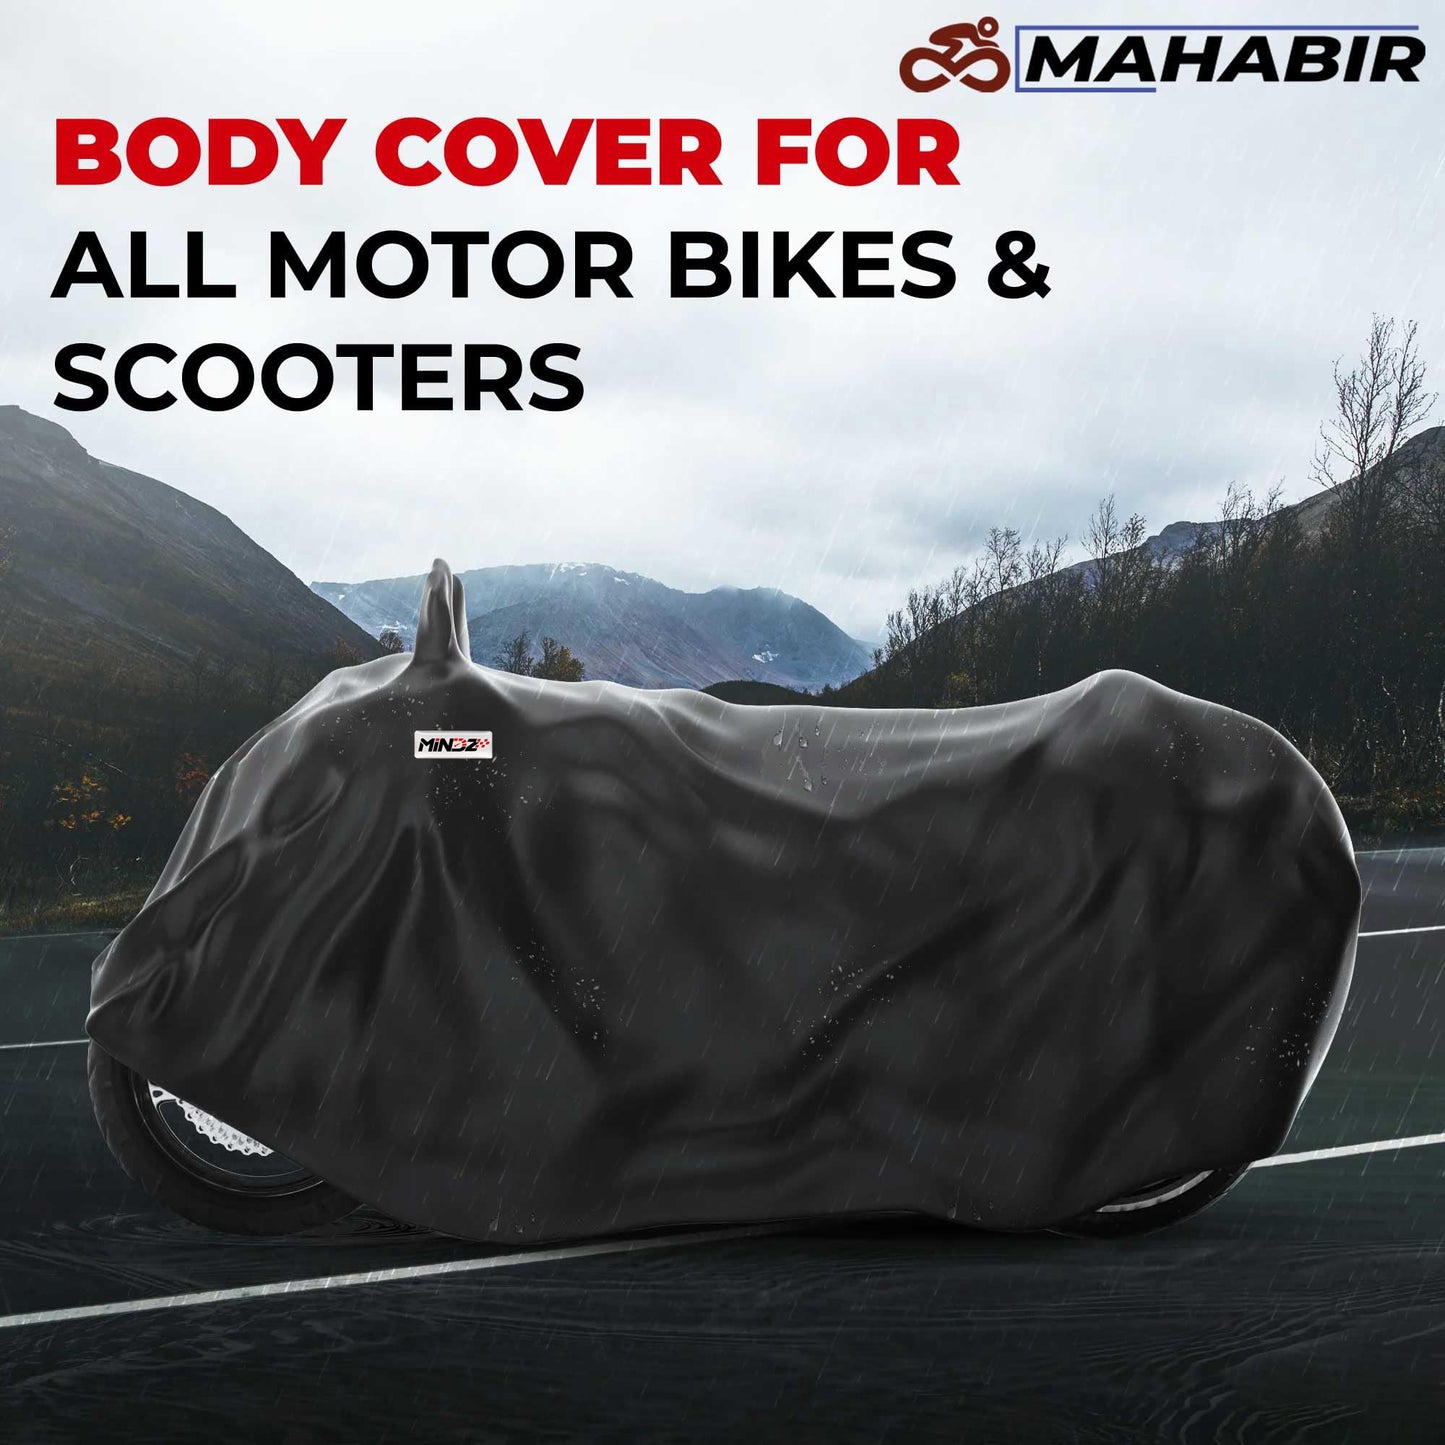 BODY COVER FOR RAY ZR 125